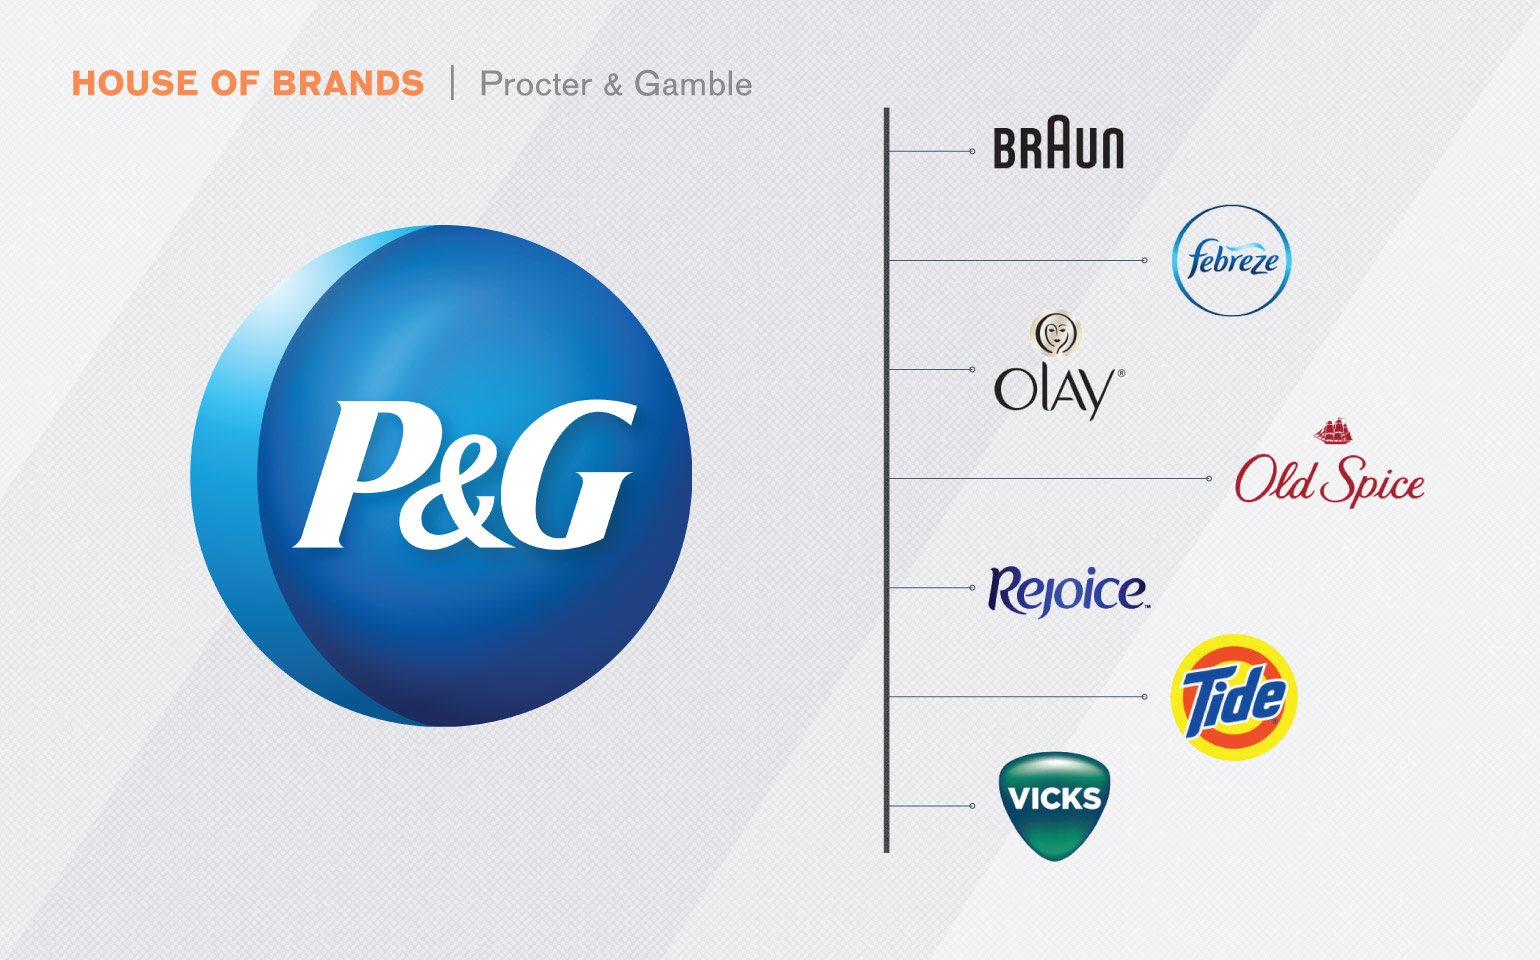 Procter & Gamble House of Brands